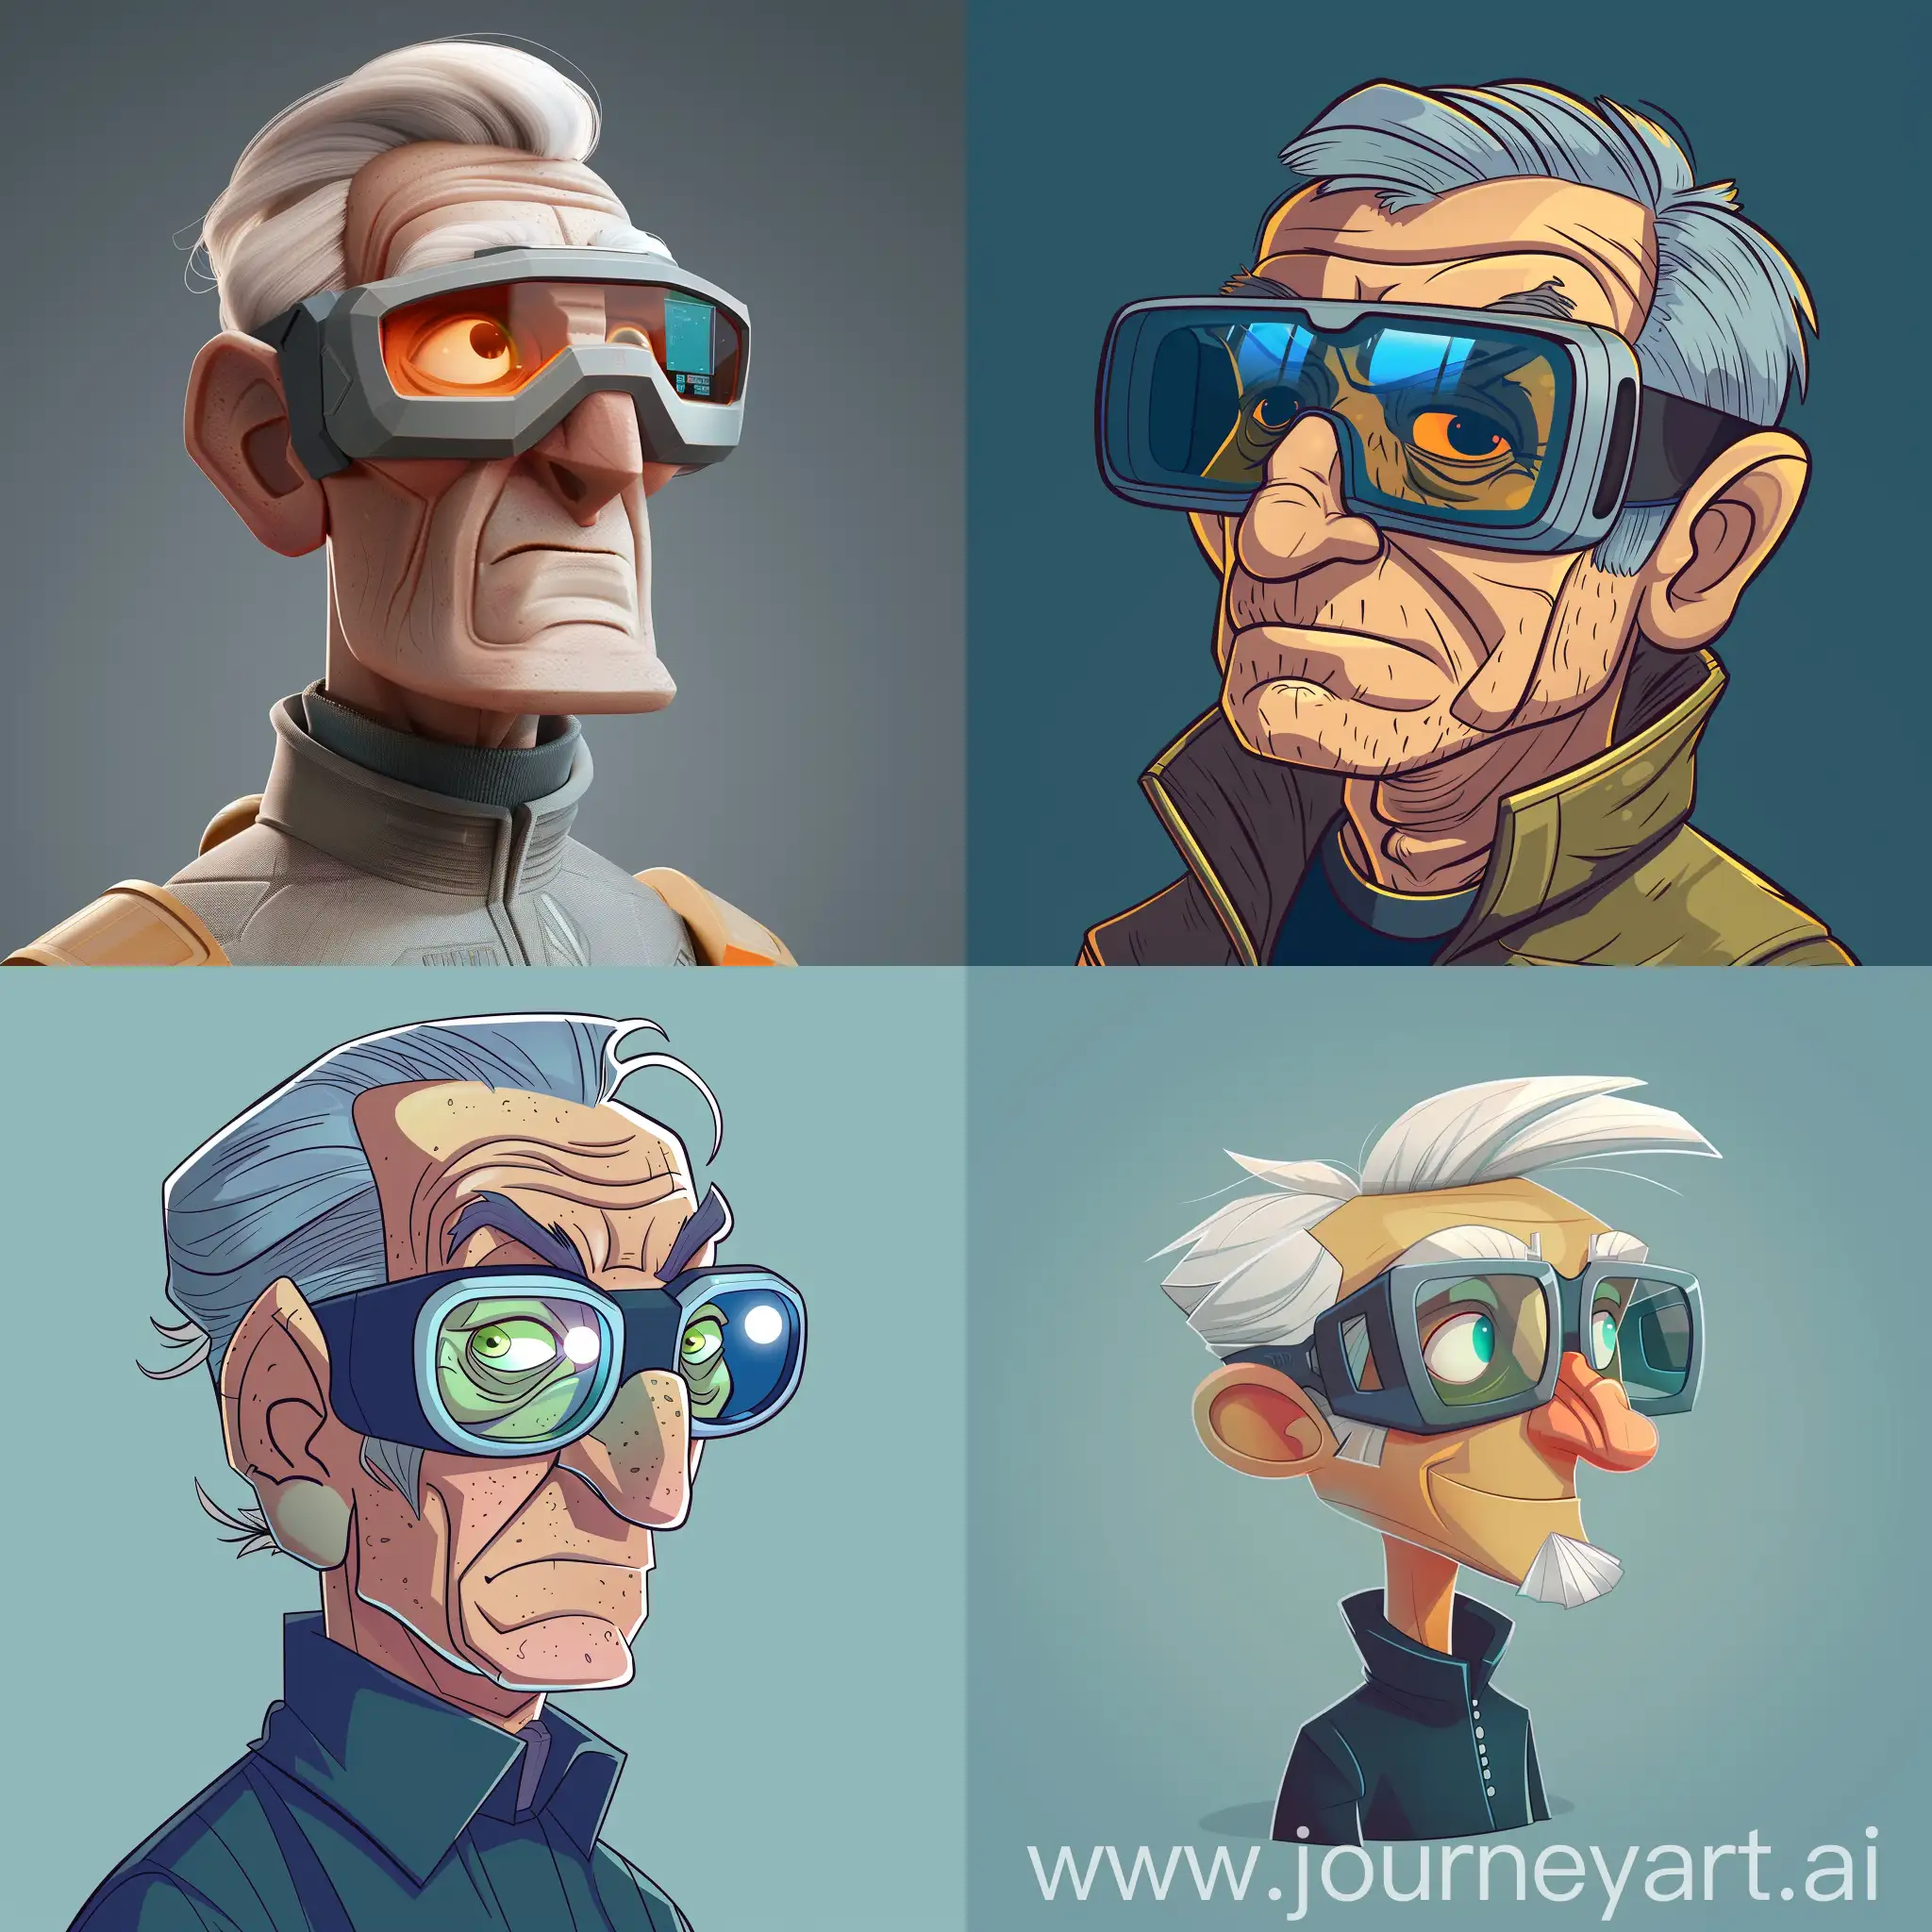 Futuristic-MiddleAged-Man-with-Smart-Glasses